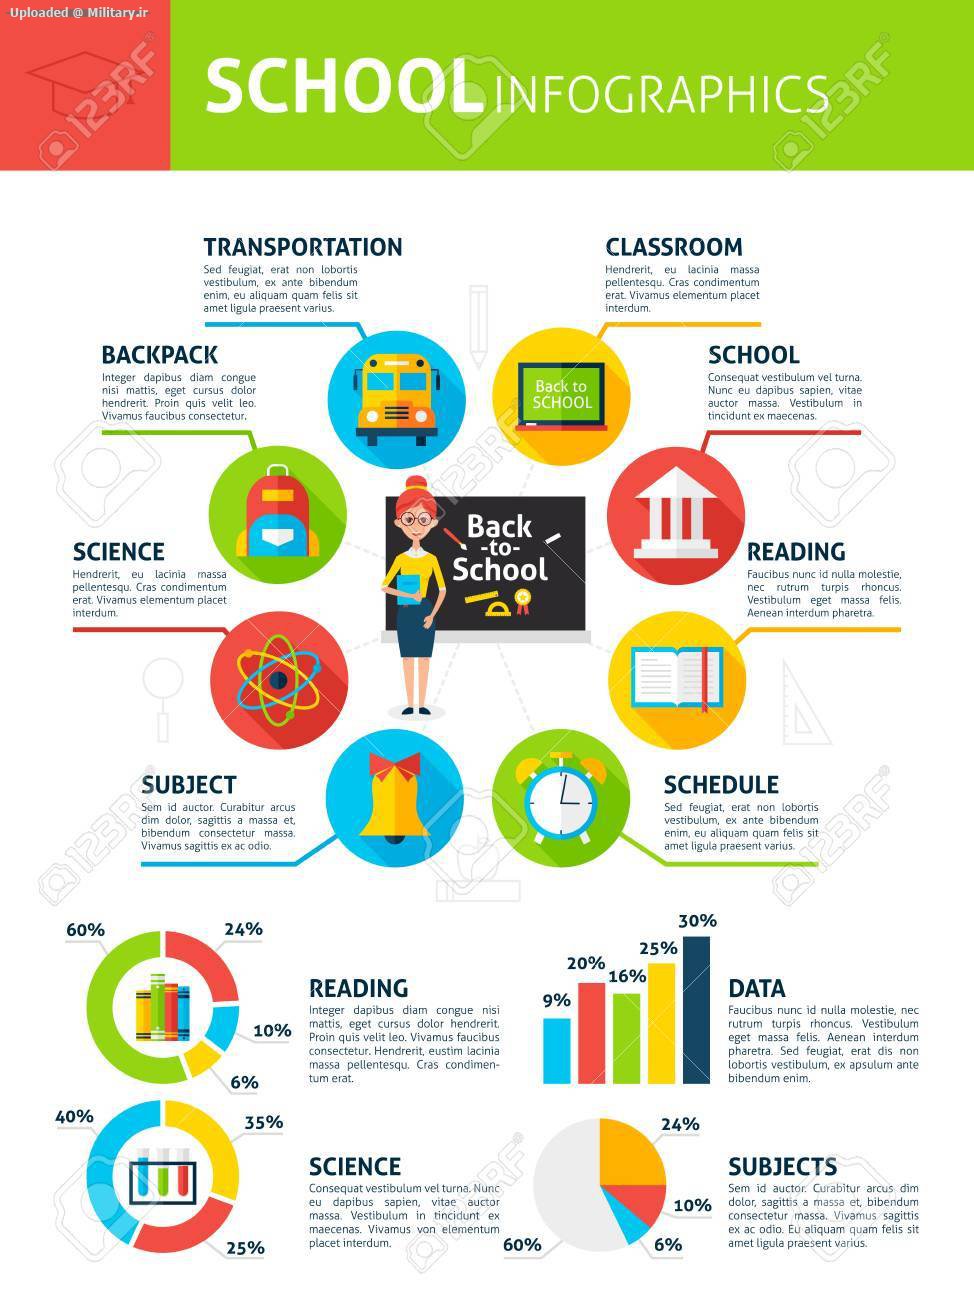 60114913-school-infographics-flat-design-vector-illustration-of-education-concept-with-text-.jpg